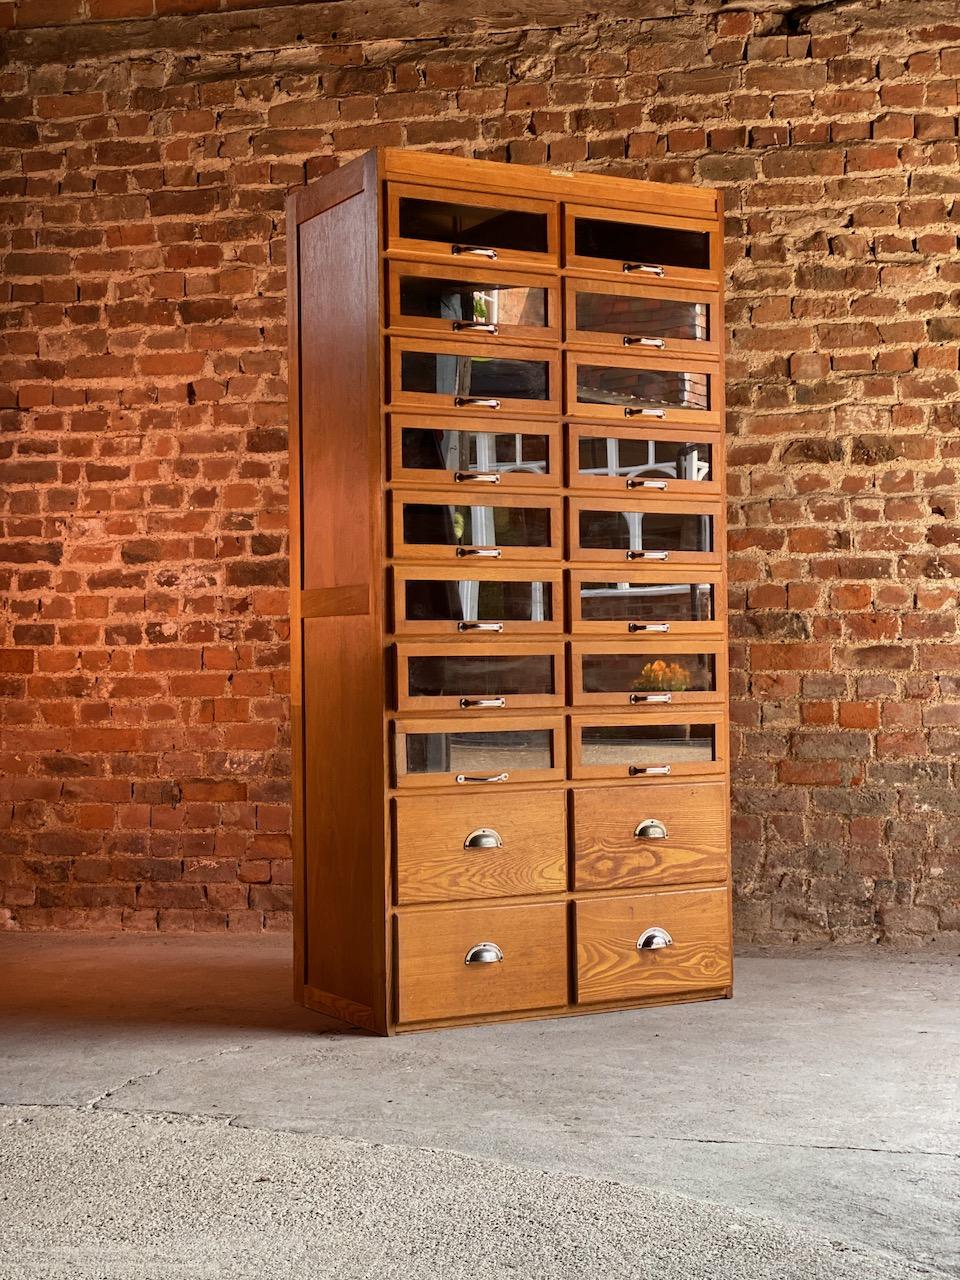 Haberdashery oak cabinet, circa 1930

Stunning early 20th century Haberdashery golden oak cabinet, circa 1930s, this incredible cabinet comes from Withy Grove Stores in Manchester, these cabinets are now very desirable and highly sought after, not